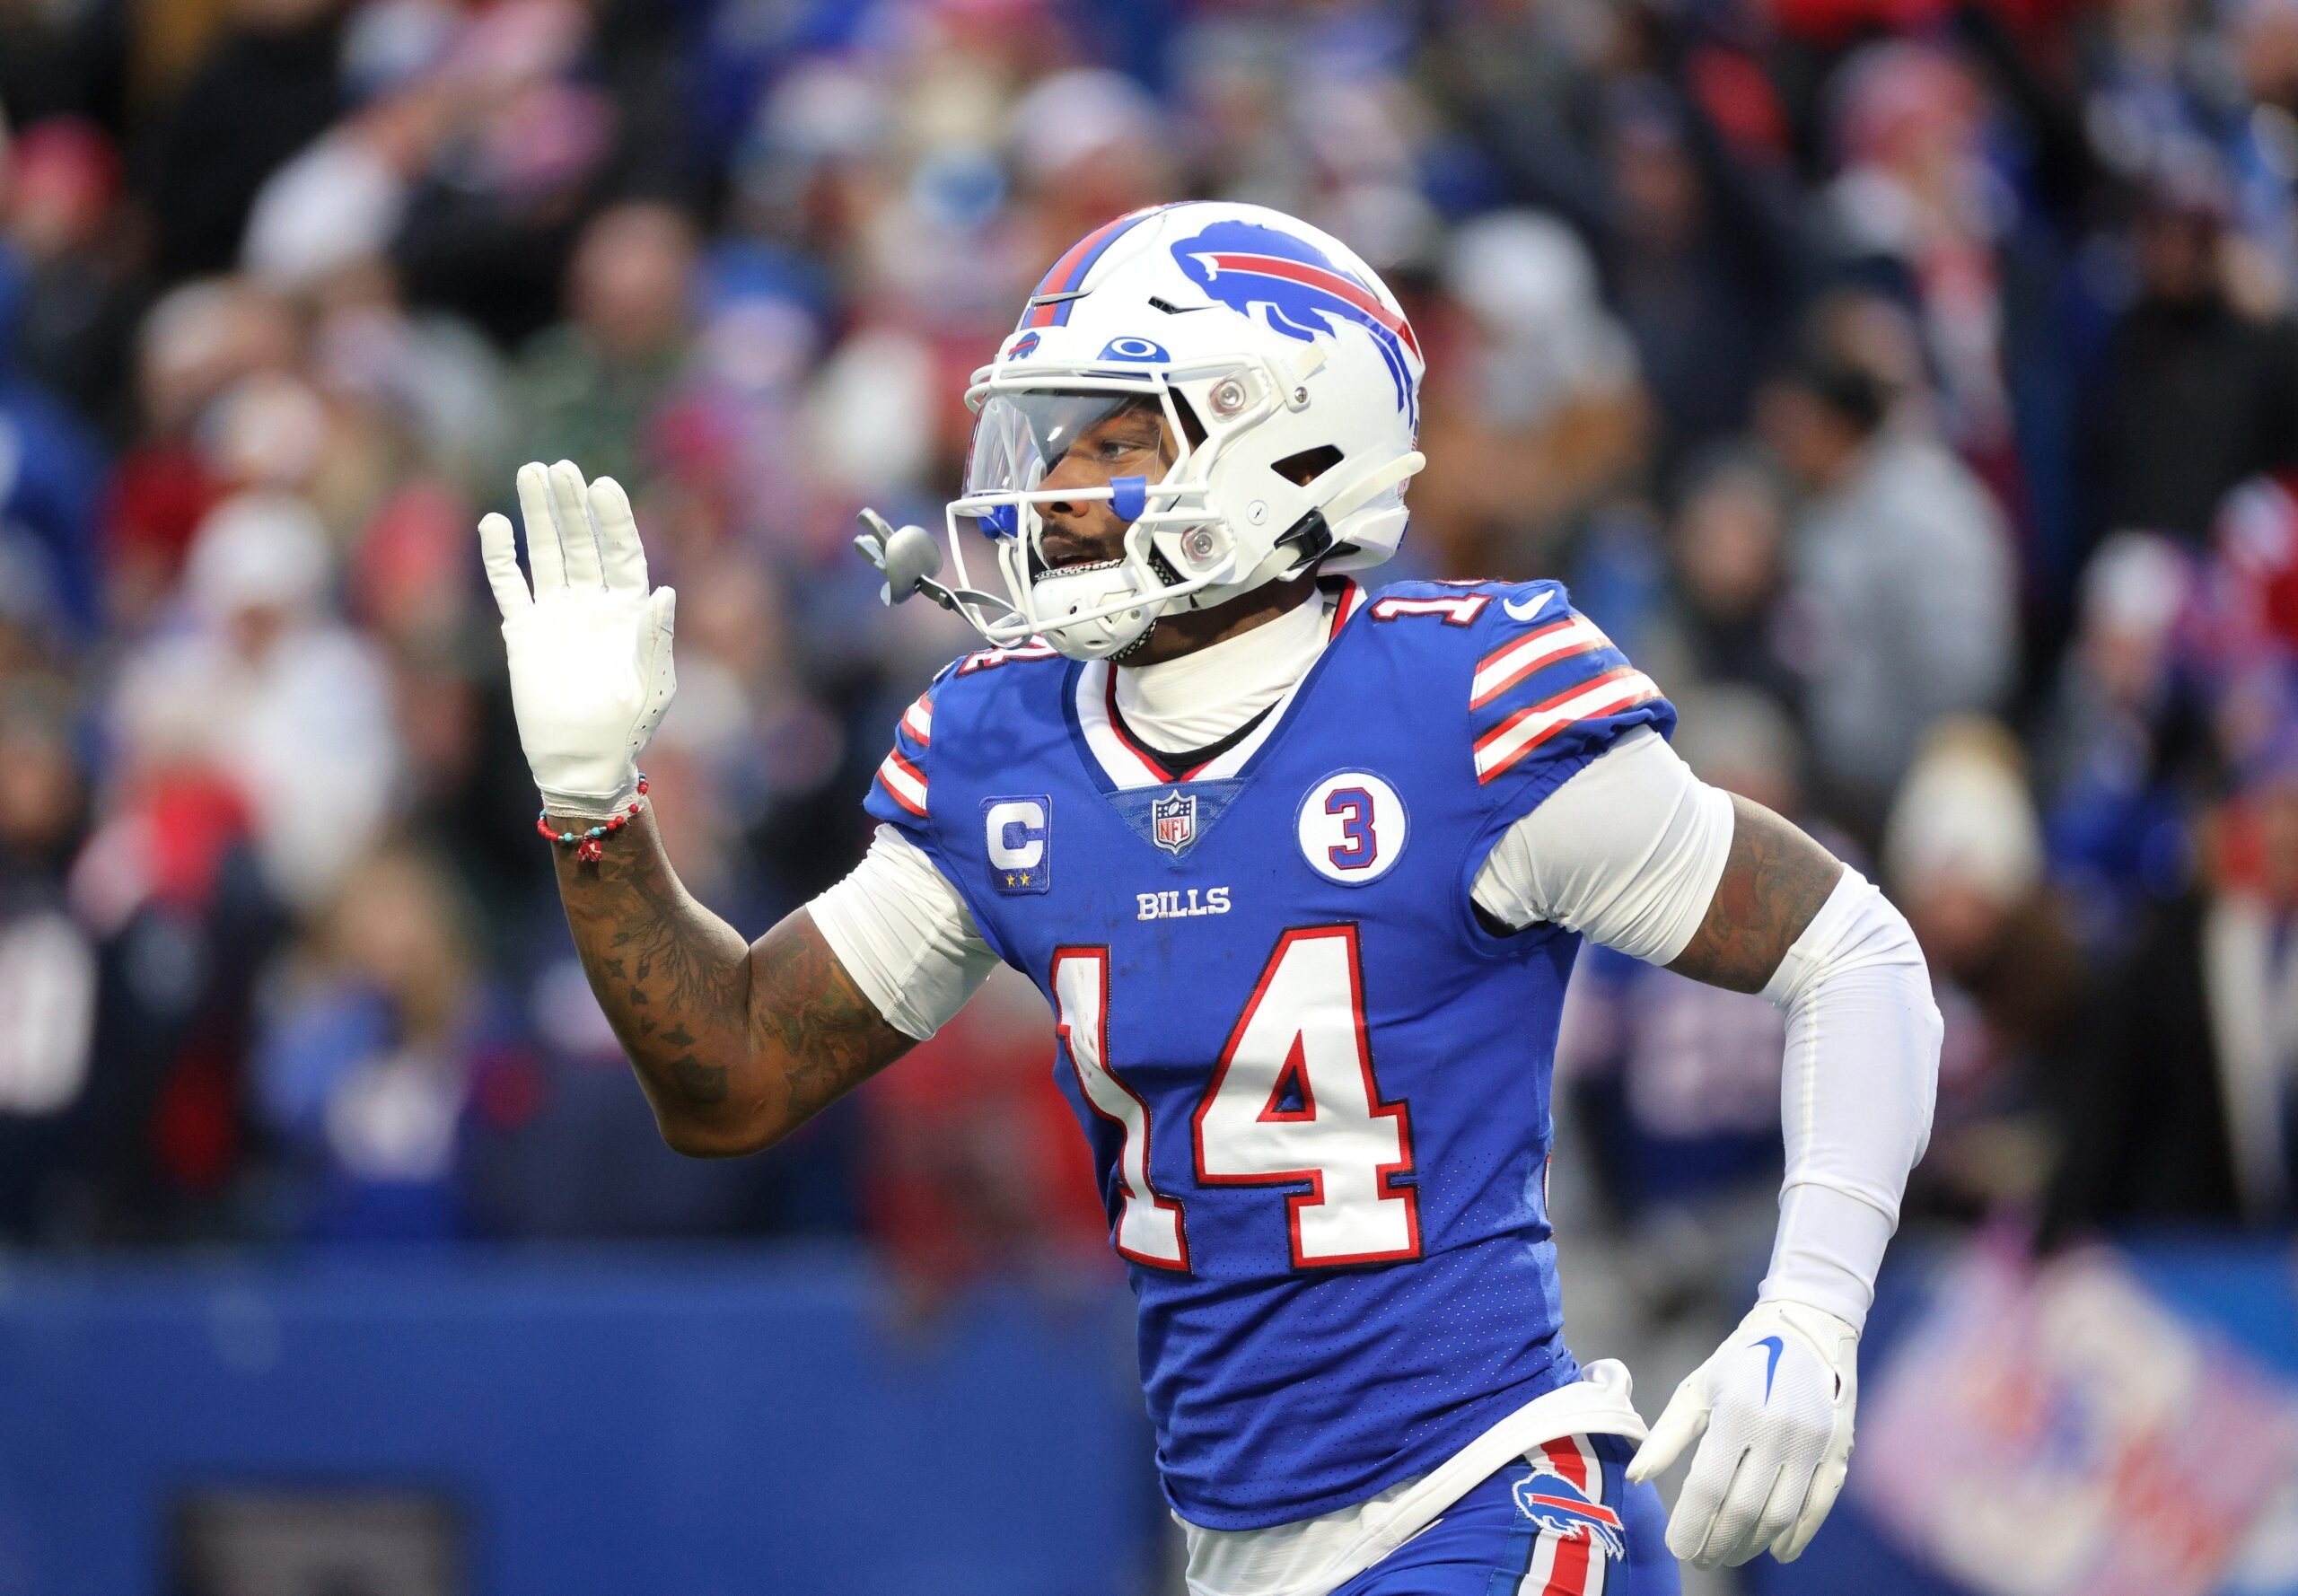 Watch Bills WR Stefon Diggs' make catch, go through table at Pro